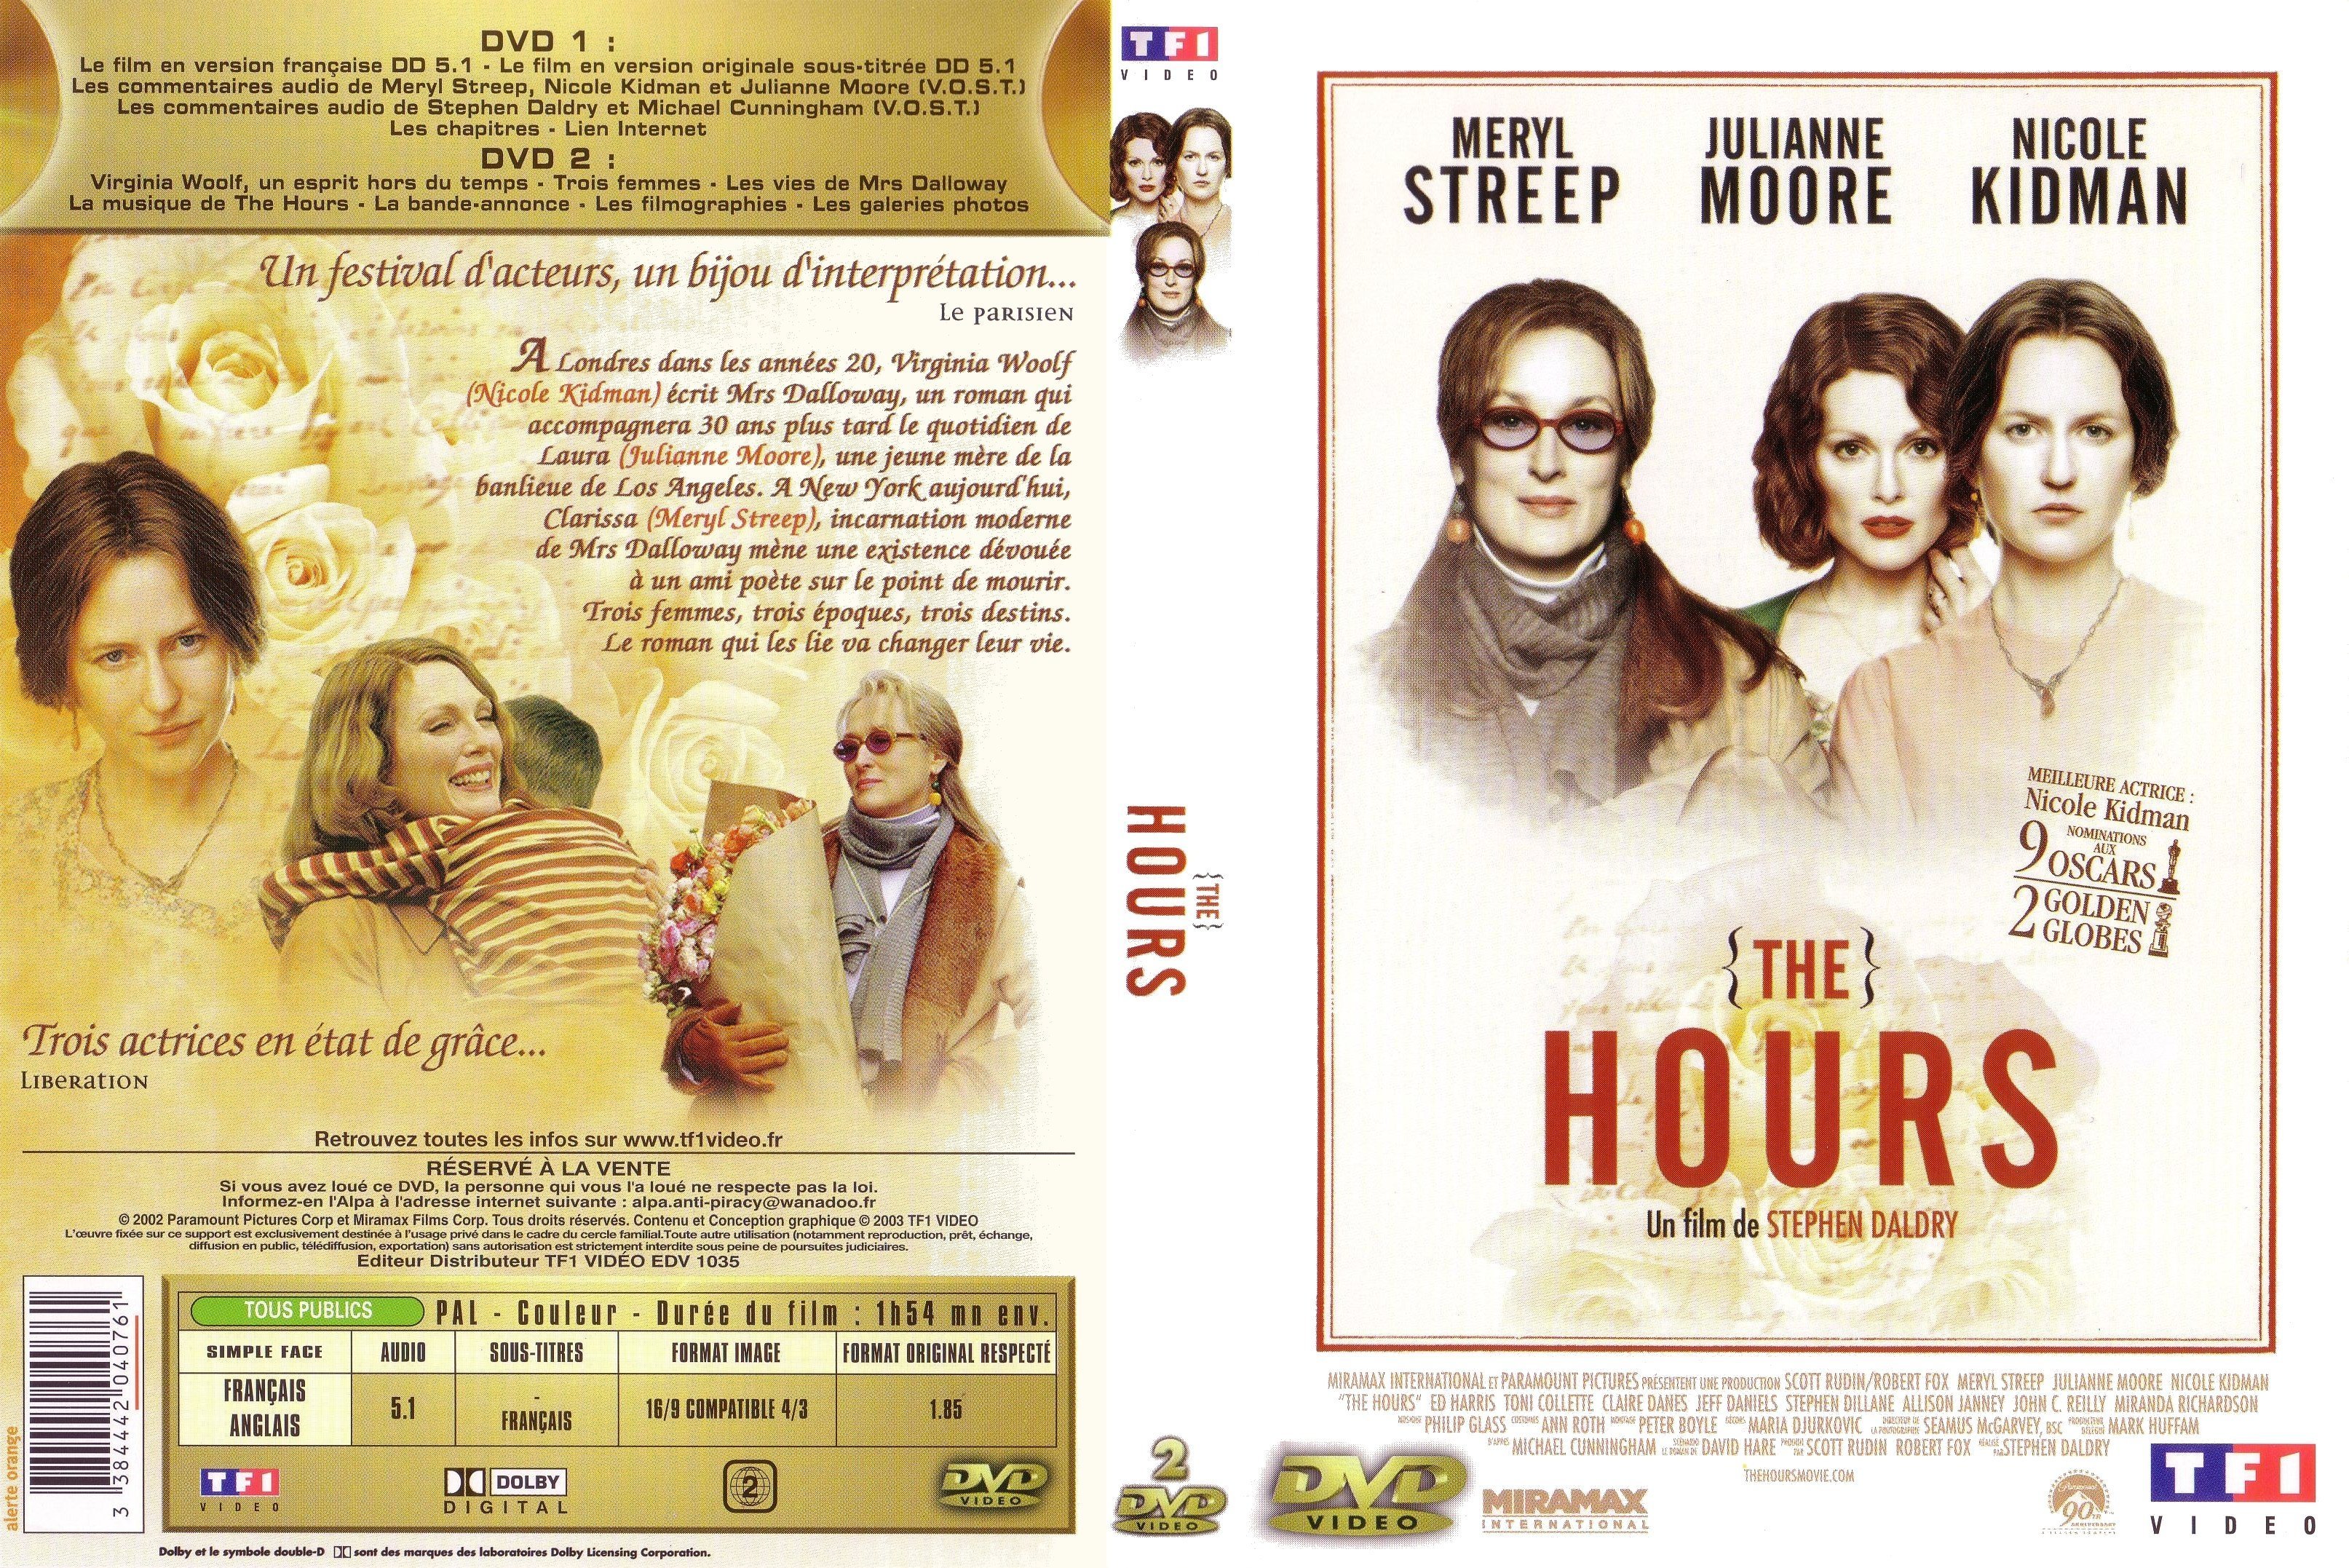 Jaquette DVD The hours v2